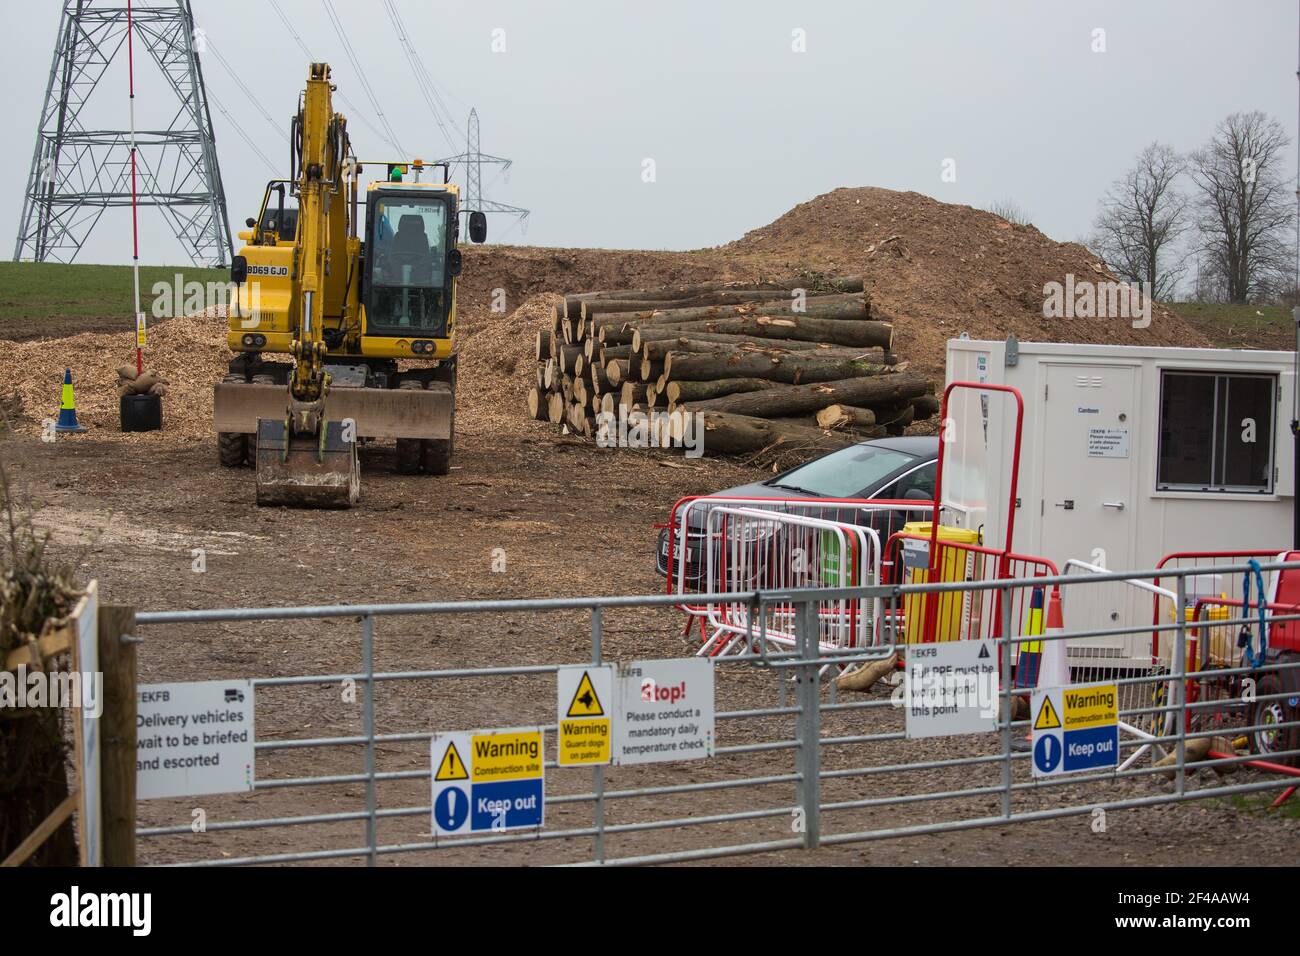 Wendover, UK. 18th March, 2021. A pile of logs from woodland felled by HS2 contractors alongside Small Dean Lane is pictured in a HS2 compound. Considerable preparatory work of this type is currently taking place between Great Missenden and Wendover to the north of the Chiltern tunnel section of the £106bn HS2 high-speed rail link. Credit: Mark Kerrison/Alamy Live News Stock Photo